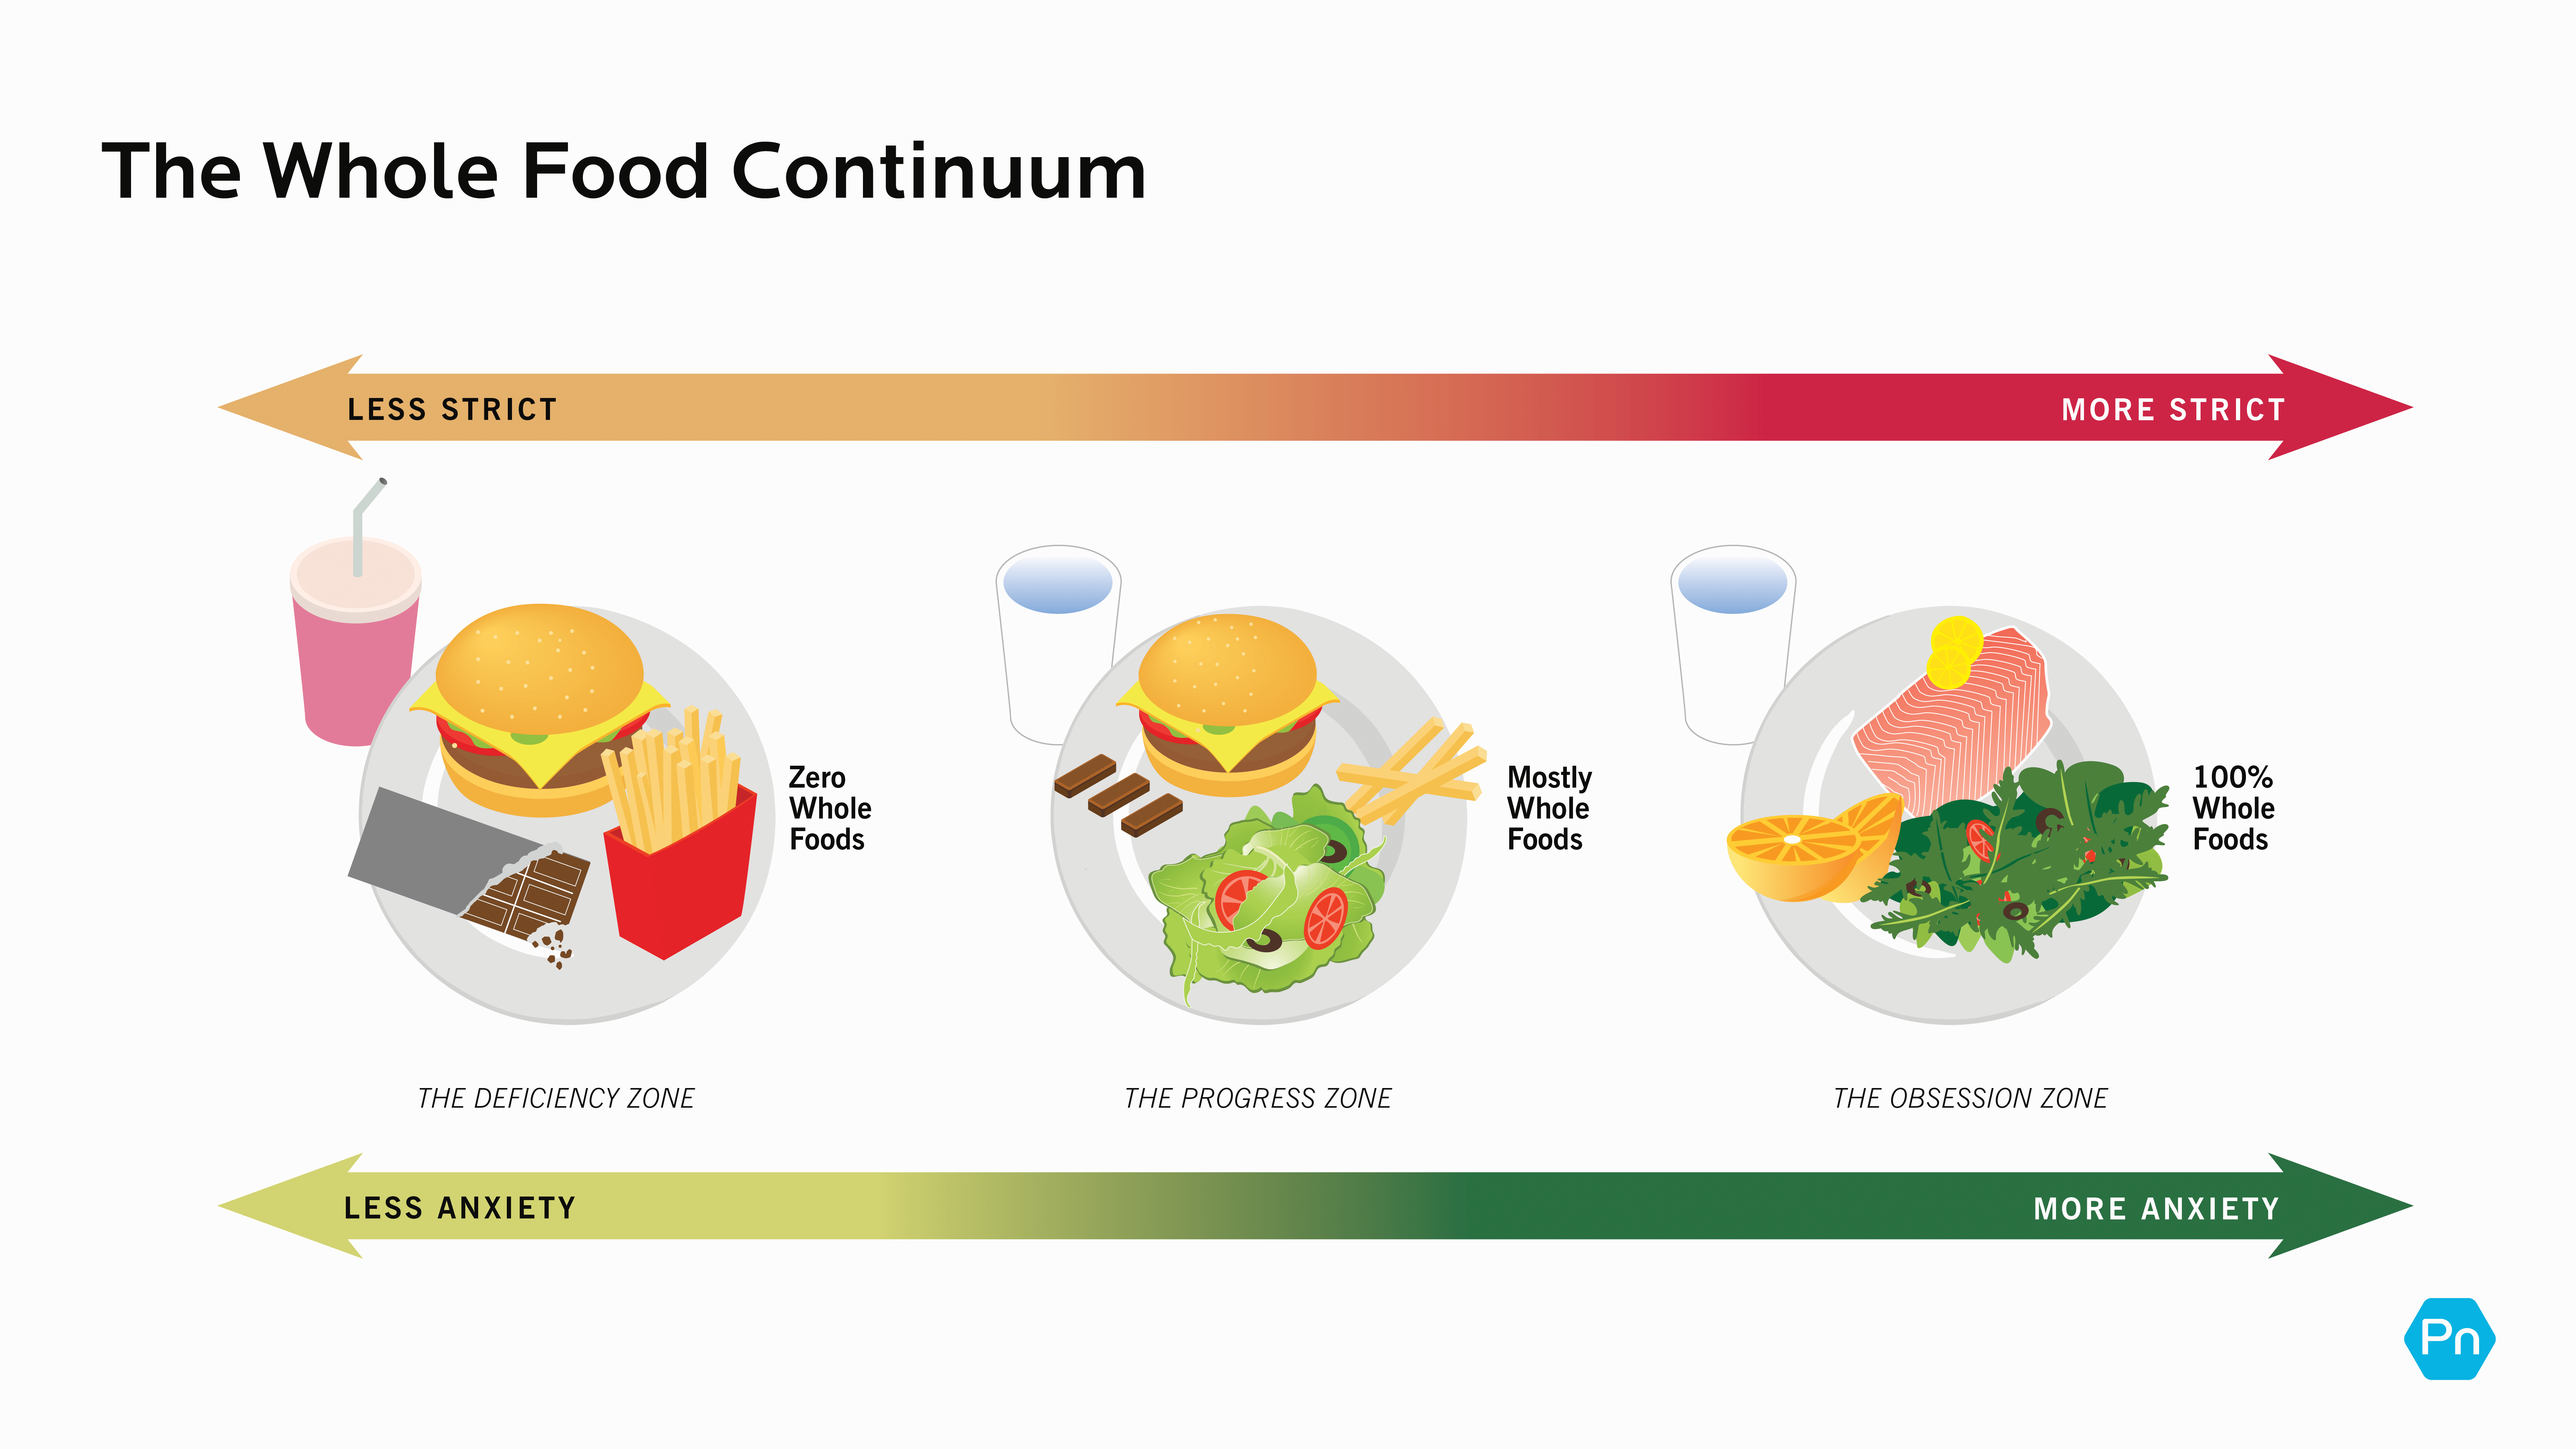 A graphic showing three plates of food. The "zero whole foods" plate shows a supersized fast food meal. The "mostly whole foods" plate shows a small burger, big salad, handful of fries, and three squares of chocolate. The "100% whole foods plate" shows salmon, a big mesclun salad and fruit. The continuum shows that as food gets progressively healthier, anxiety goes up. As food gets less strict, anxiety goes down.